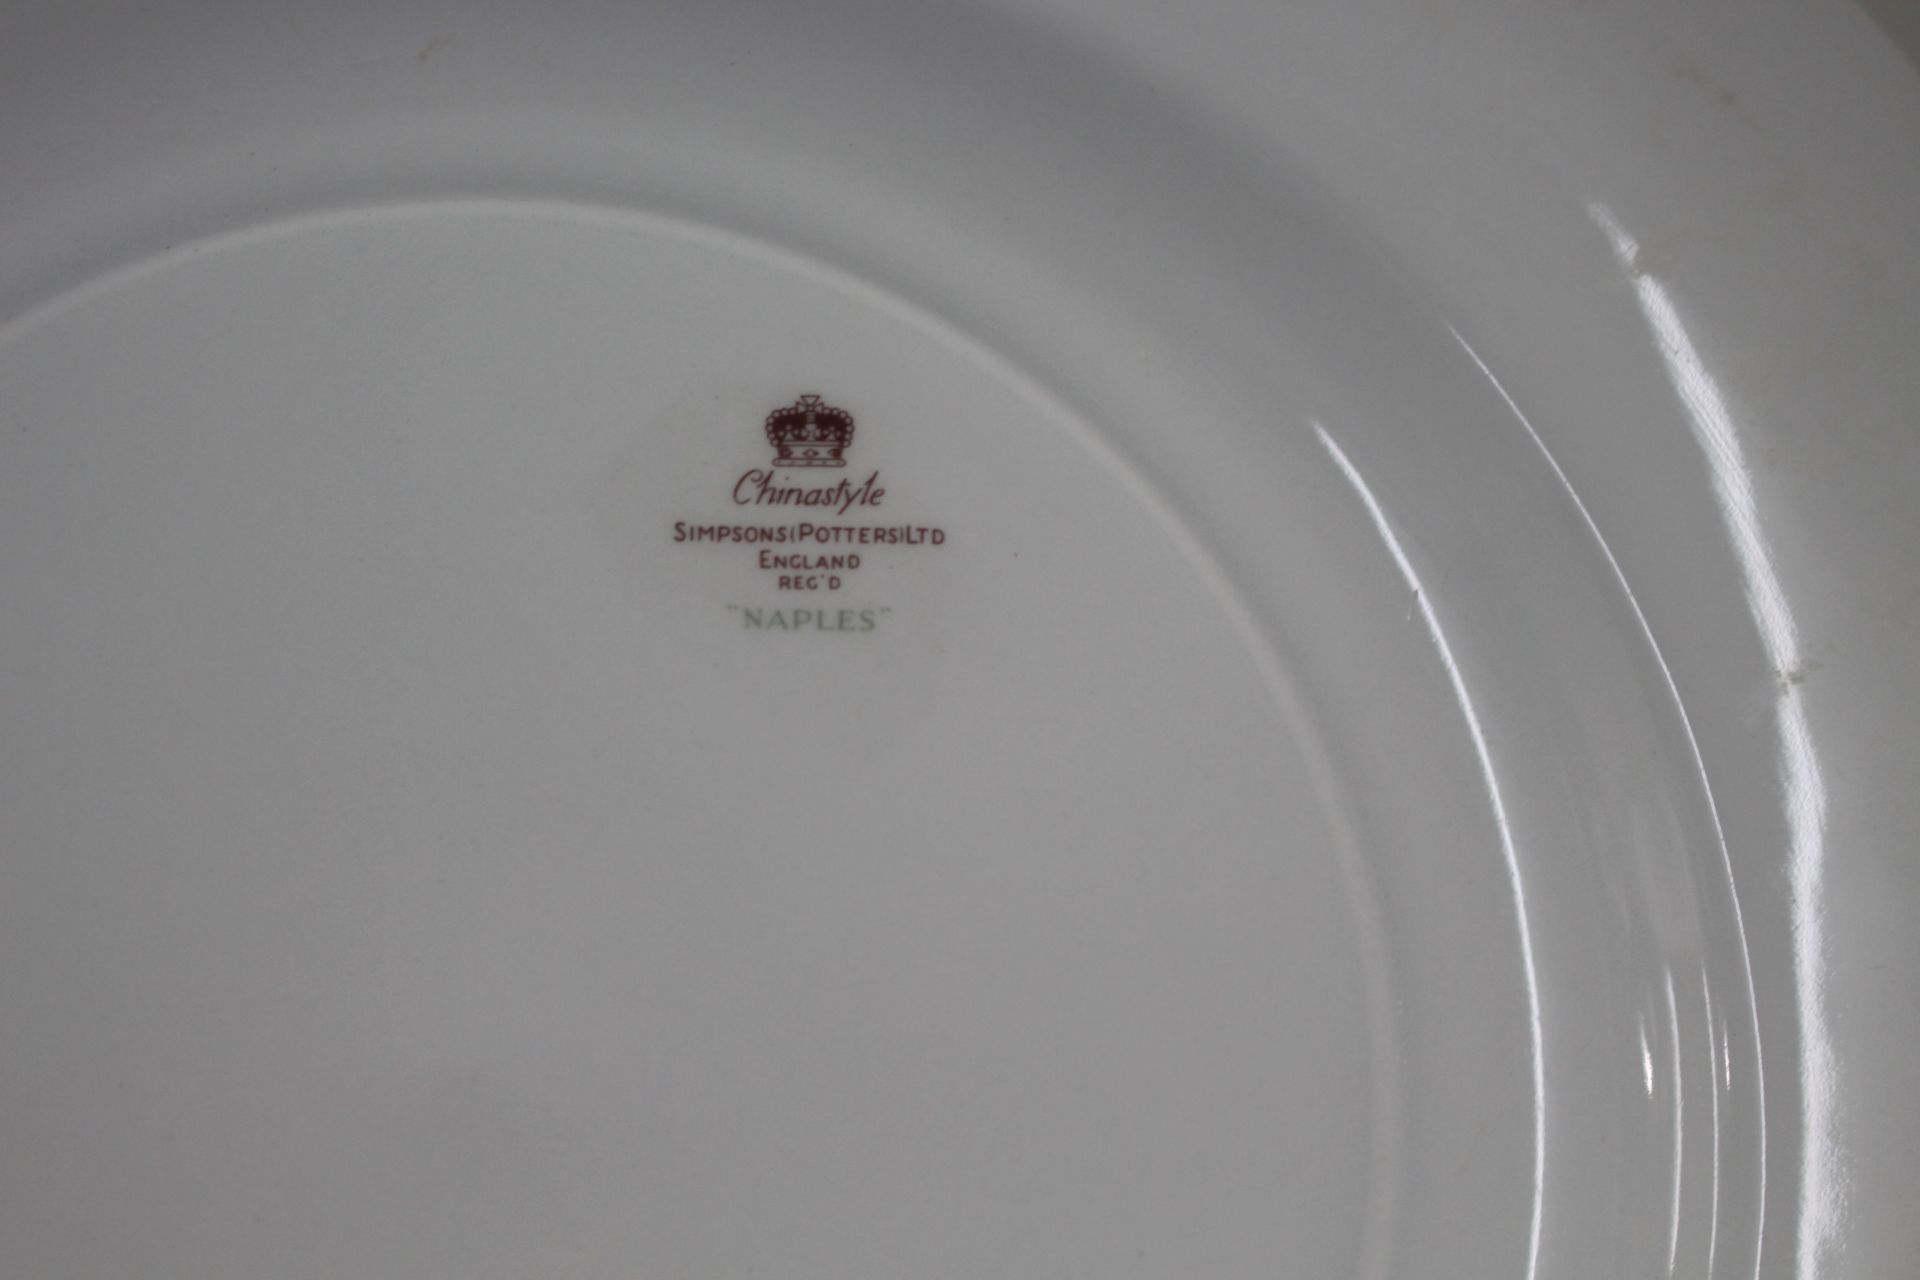 China style Simpson Potteries Naples Part Dinner Service - Image 6 of 7